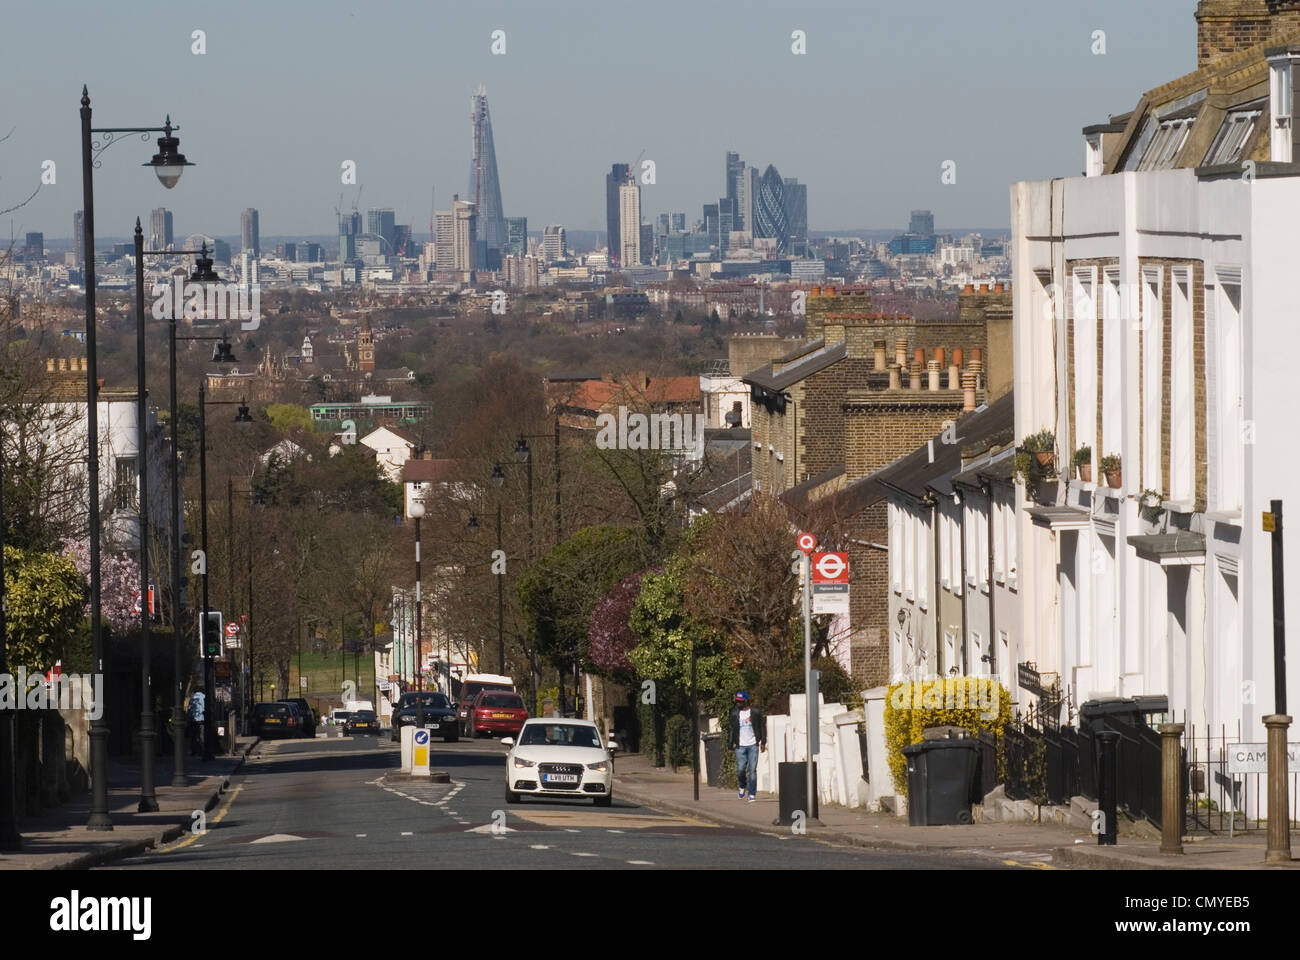 London Skyline. 2012 from Crystal Palace south London. The Shard building designed by architect Renzo Piano HOMER SYKES Stock Photo